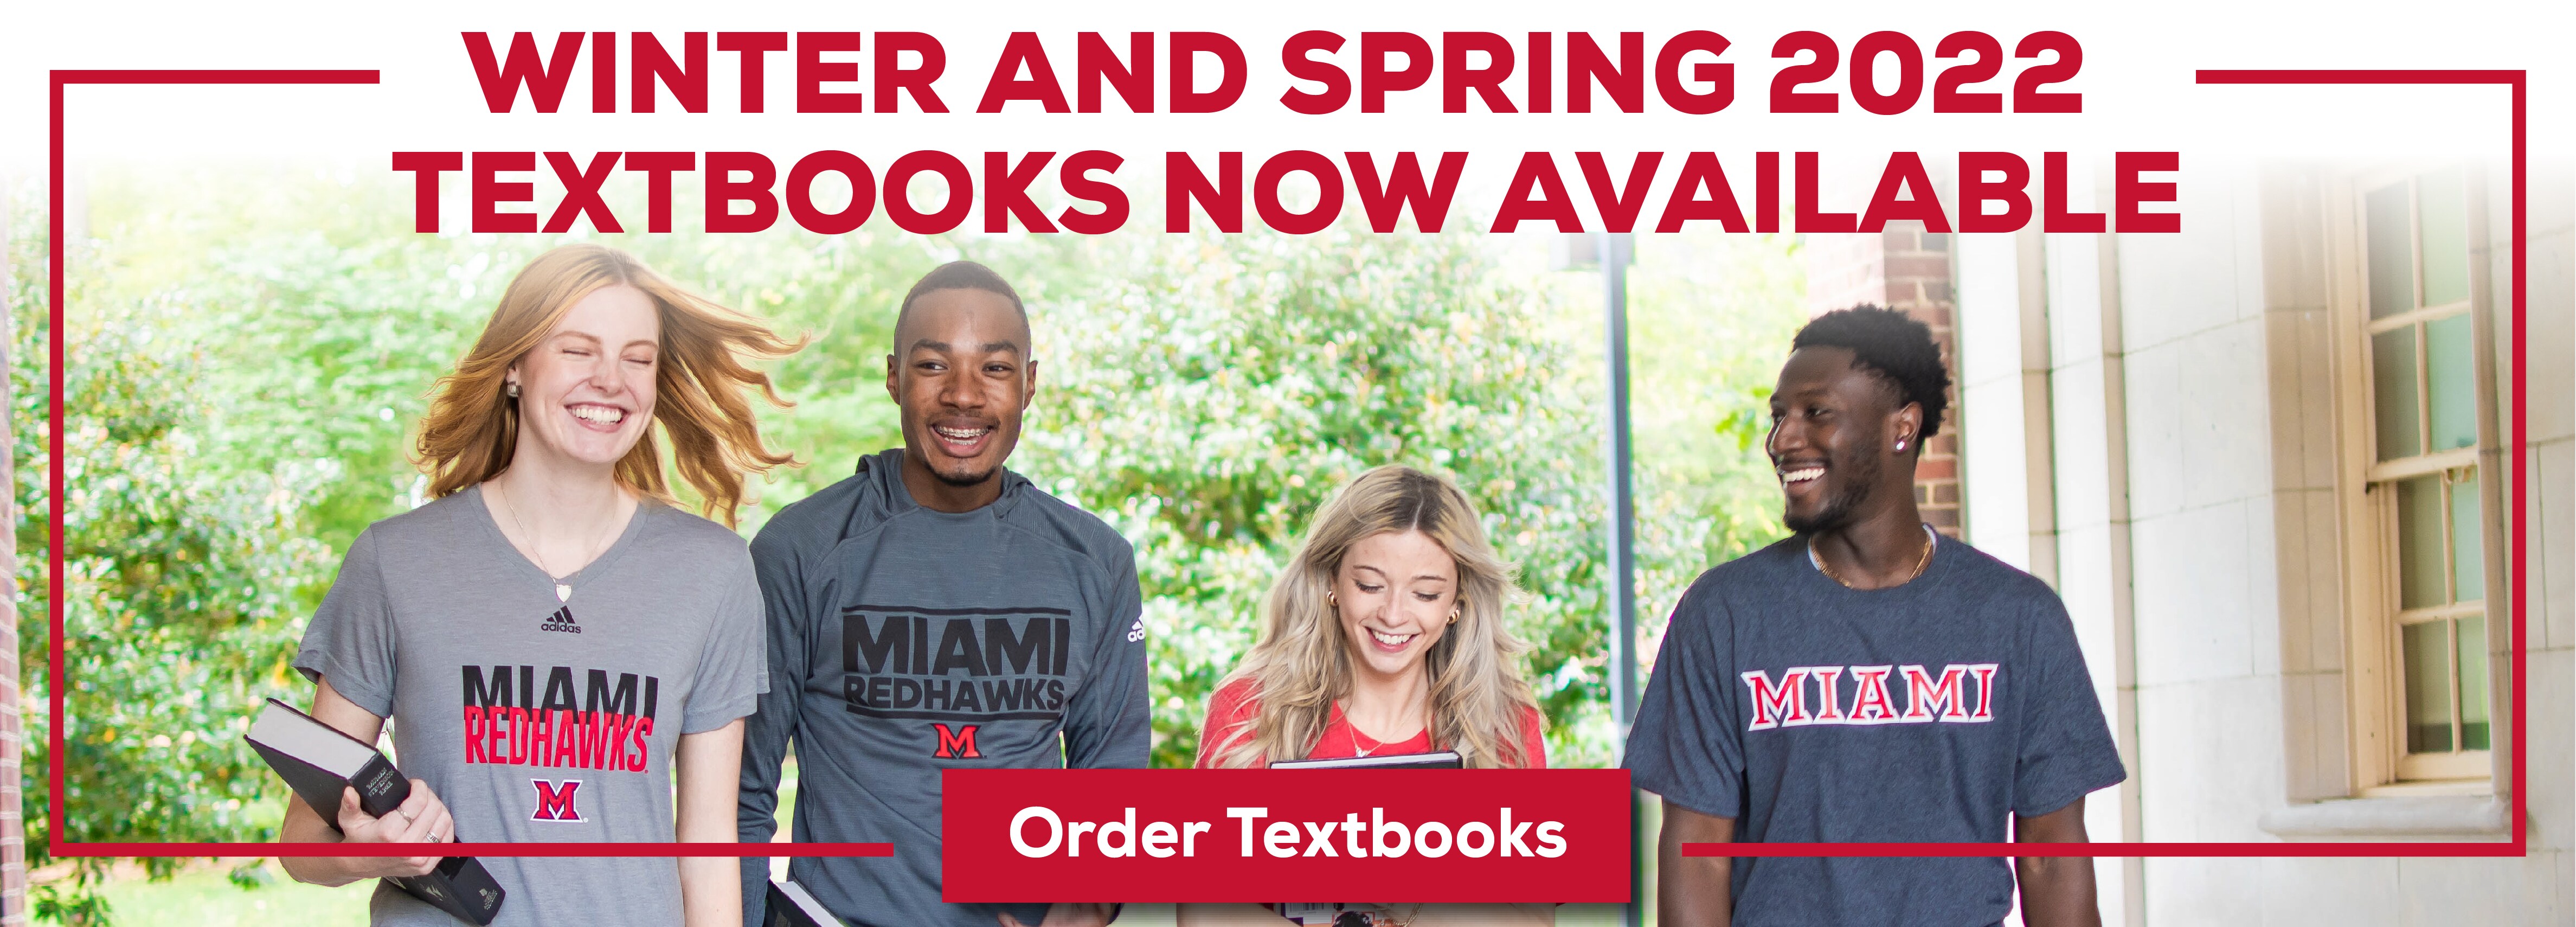 Winter and Spring 2022 Now Available - Order Textbooks